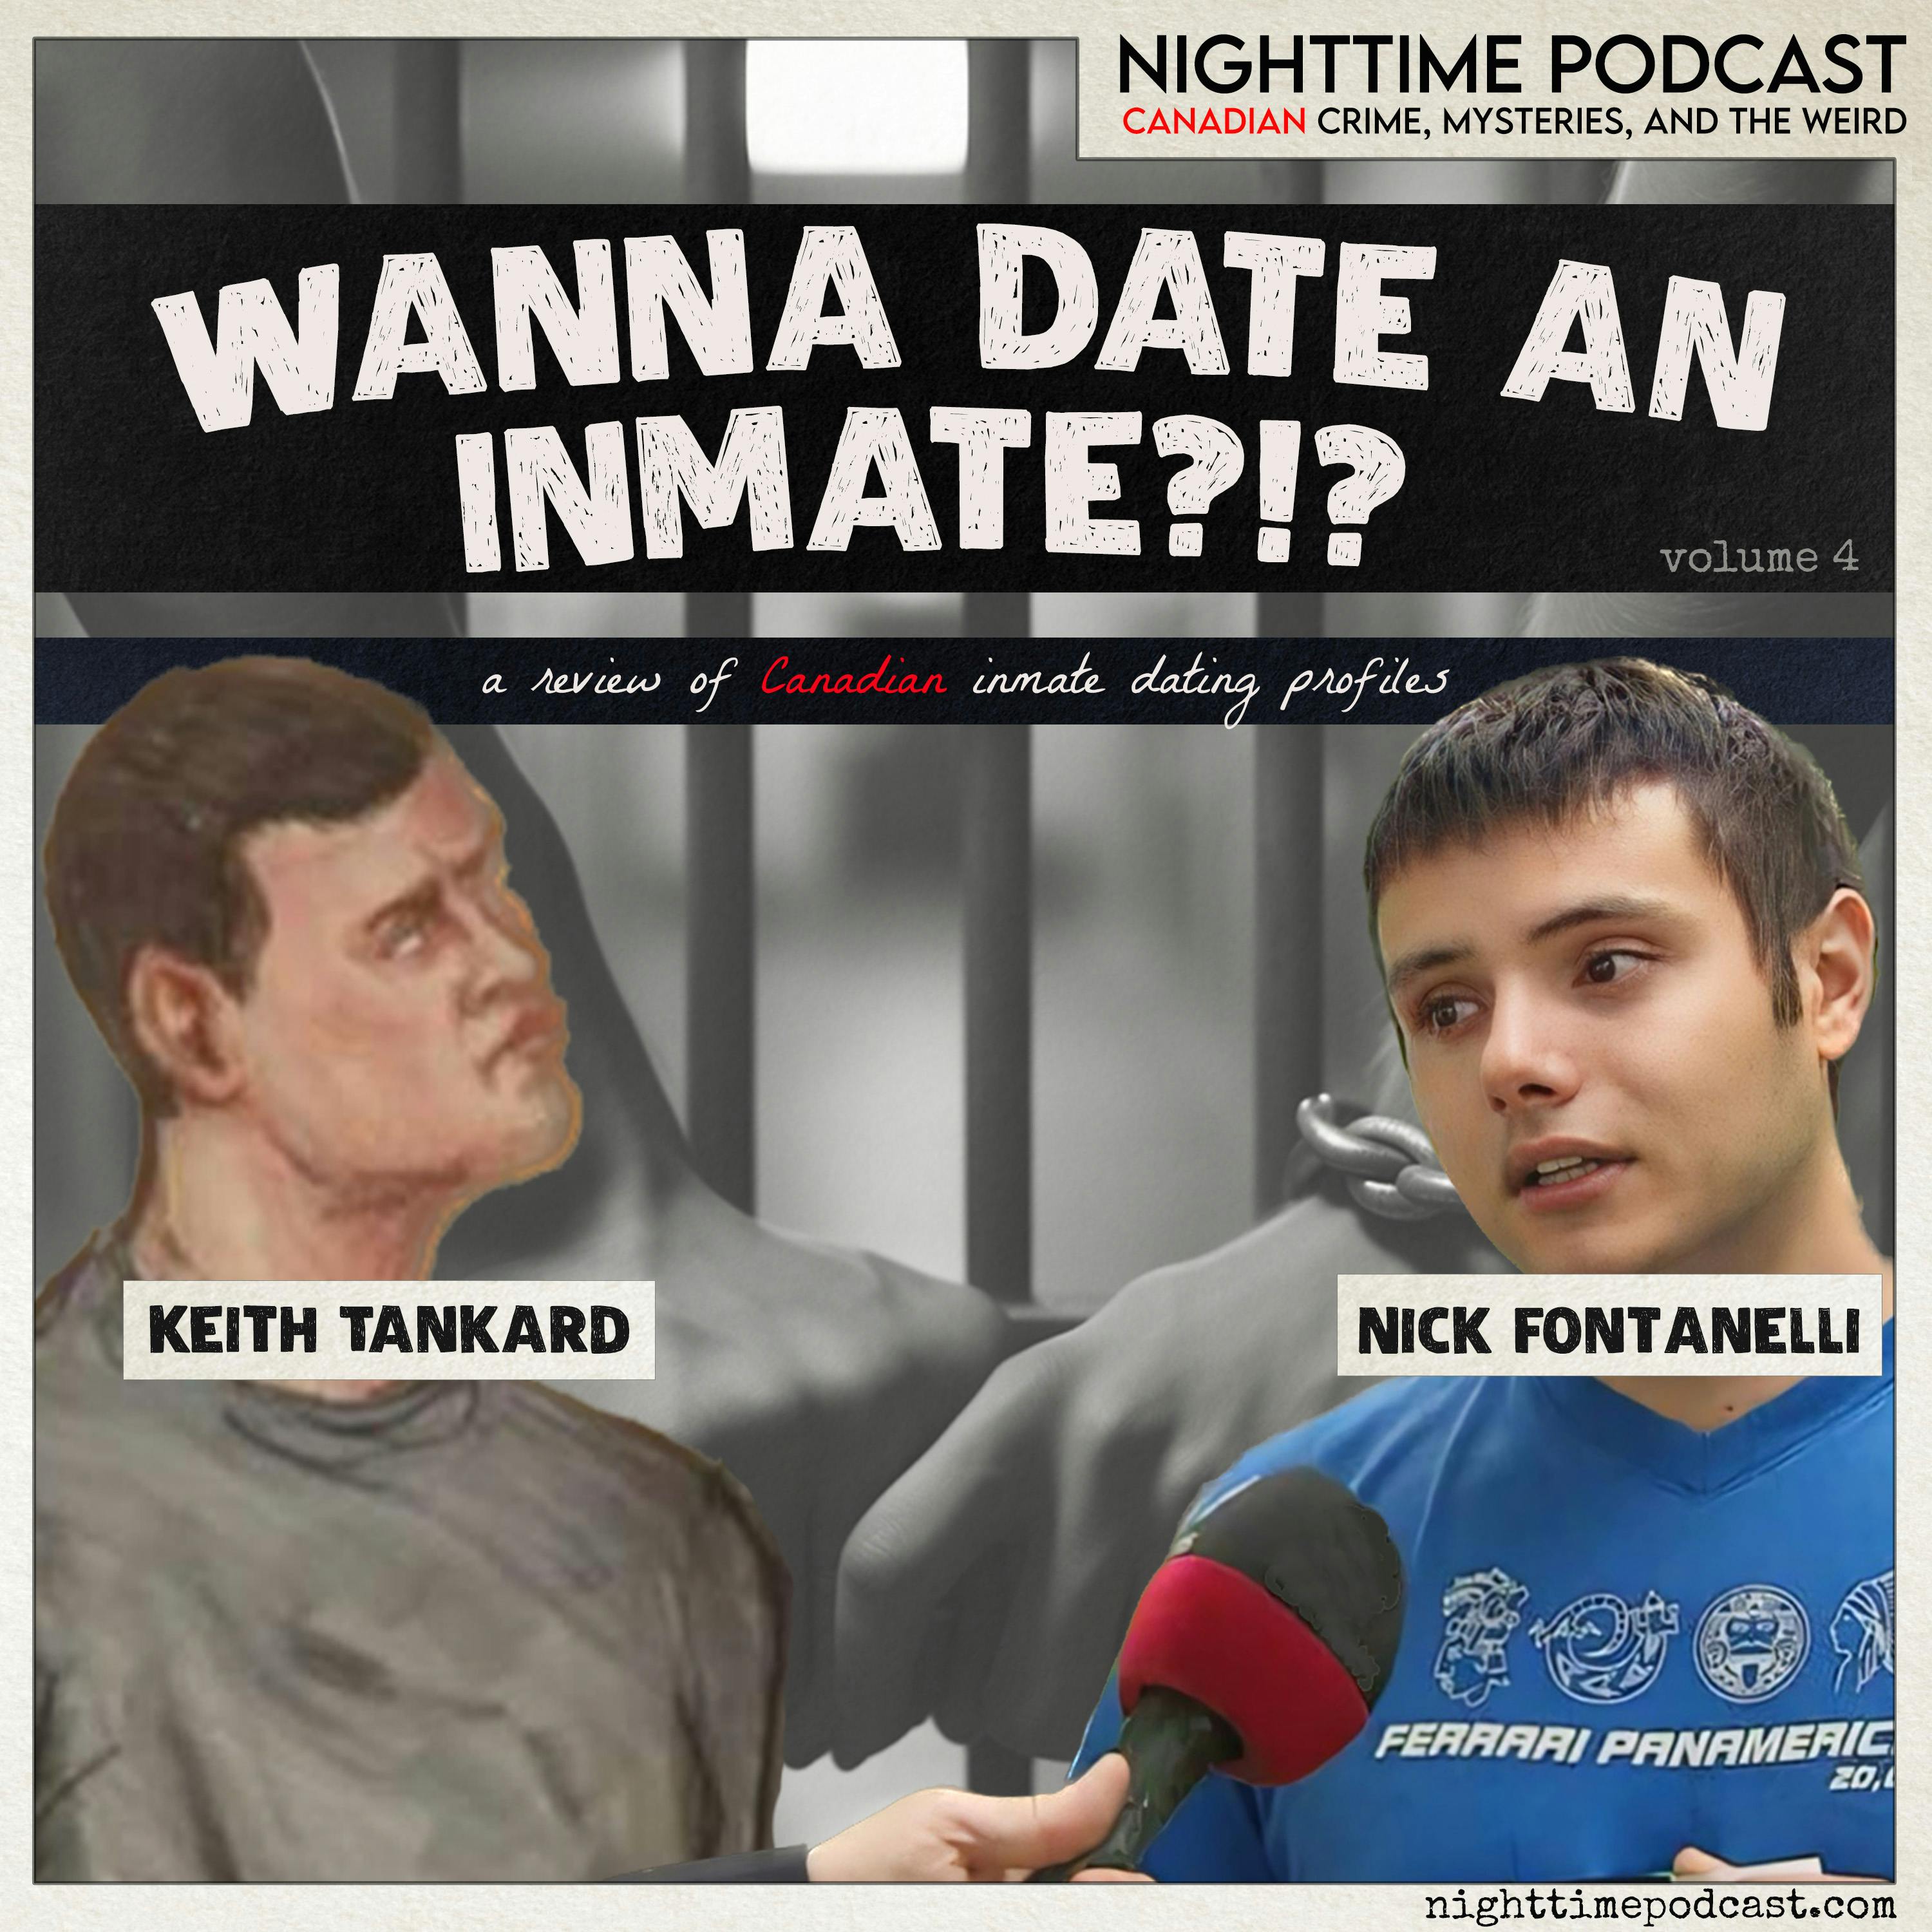 Want to Date an Inmate? - Vol. 4 - Nick Fontanelli and Keith Tankard